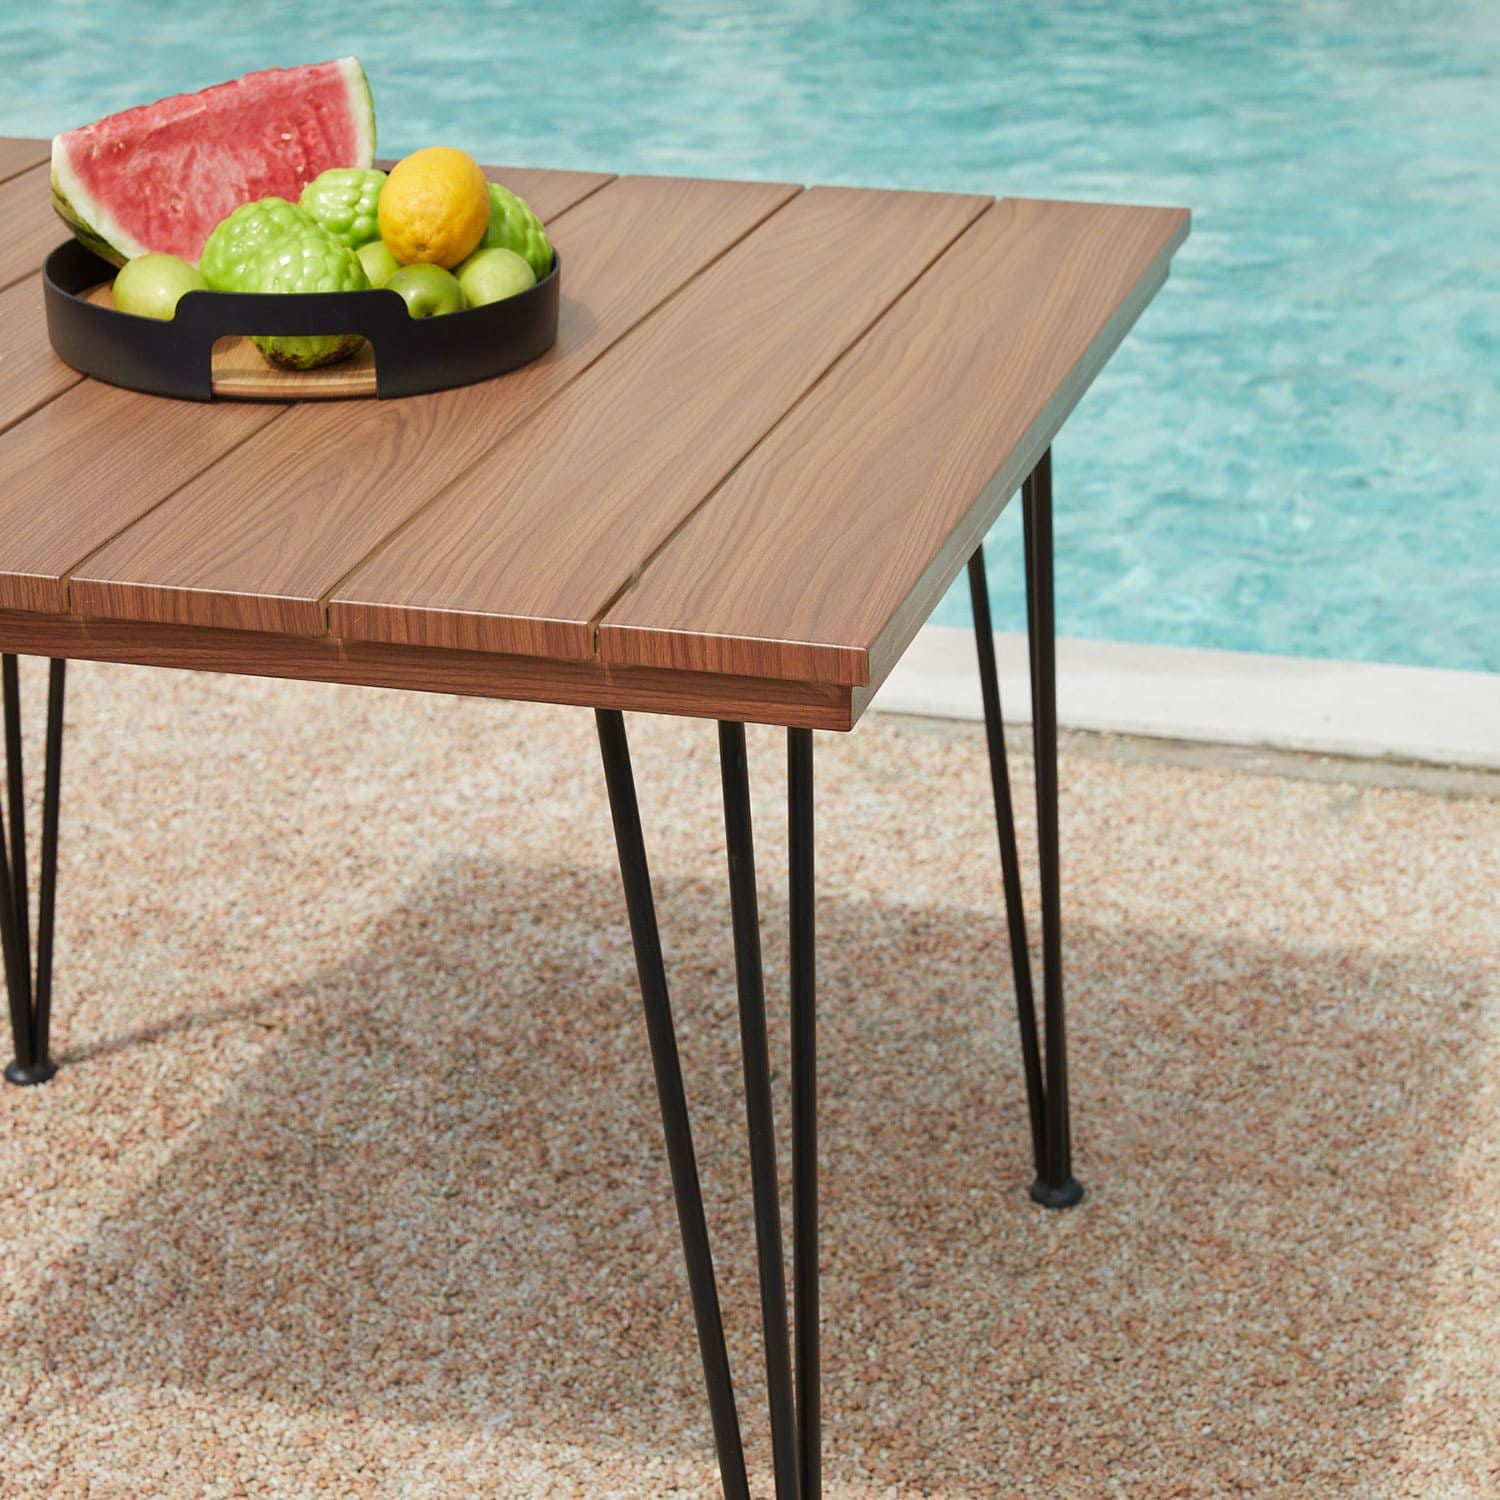 outdoor wood like metal dining table square for 4 6